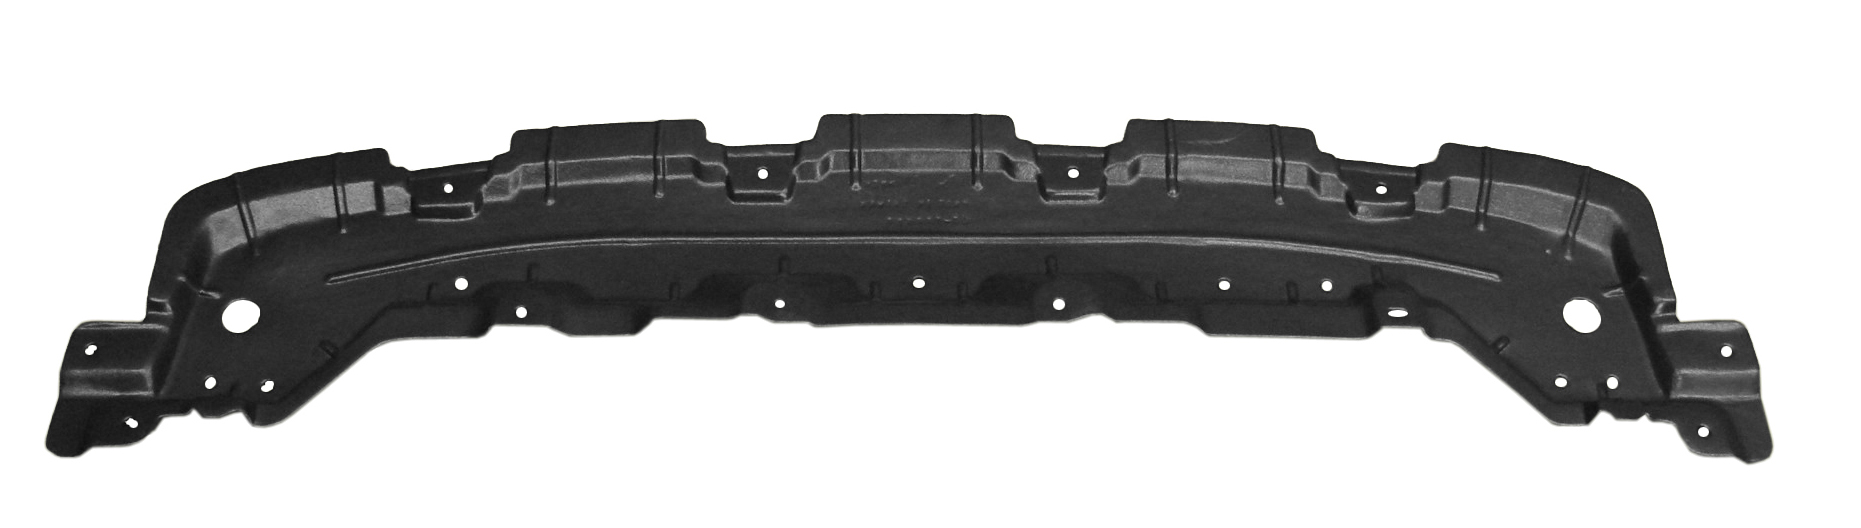 Aftermarket UNDER ENGINE COVERS for SCION - TC, tC,11-16,Lower engine cover